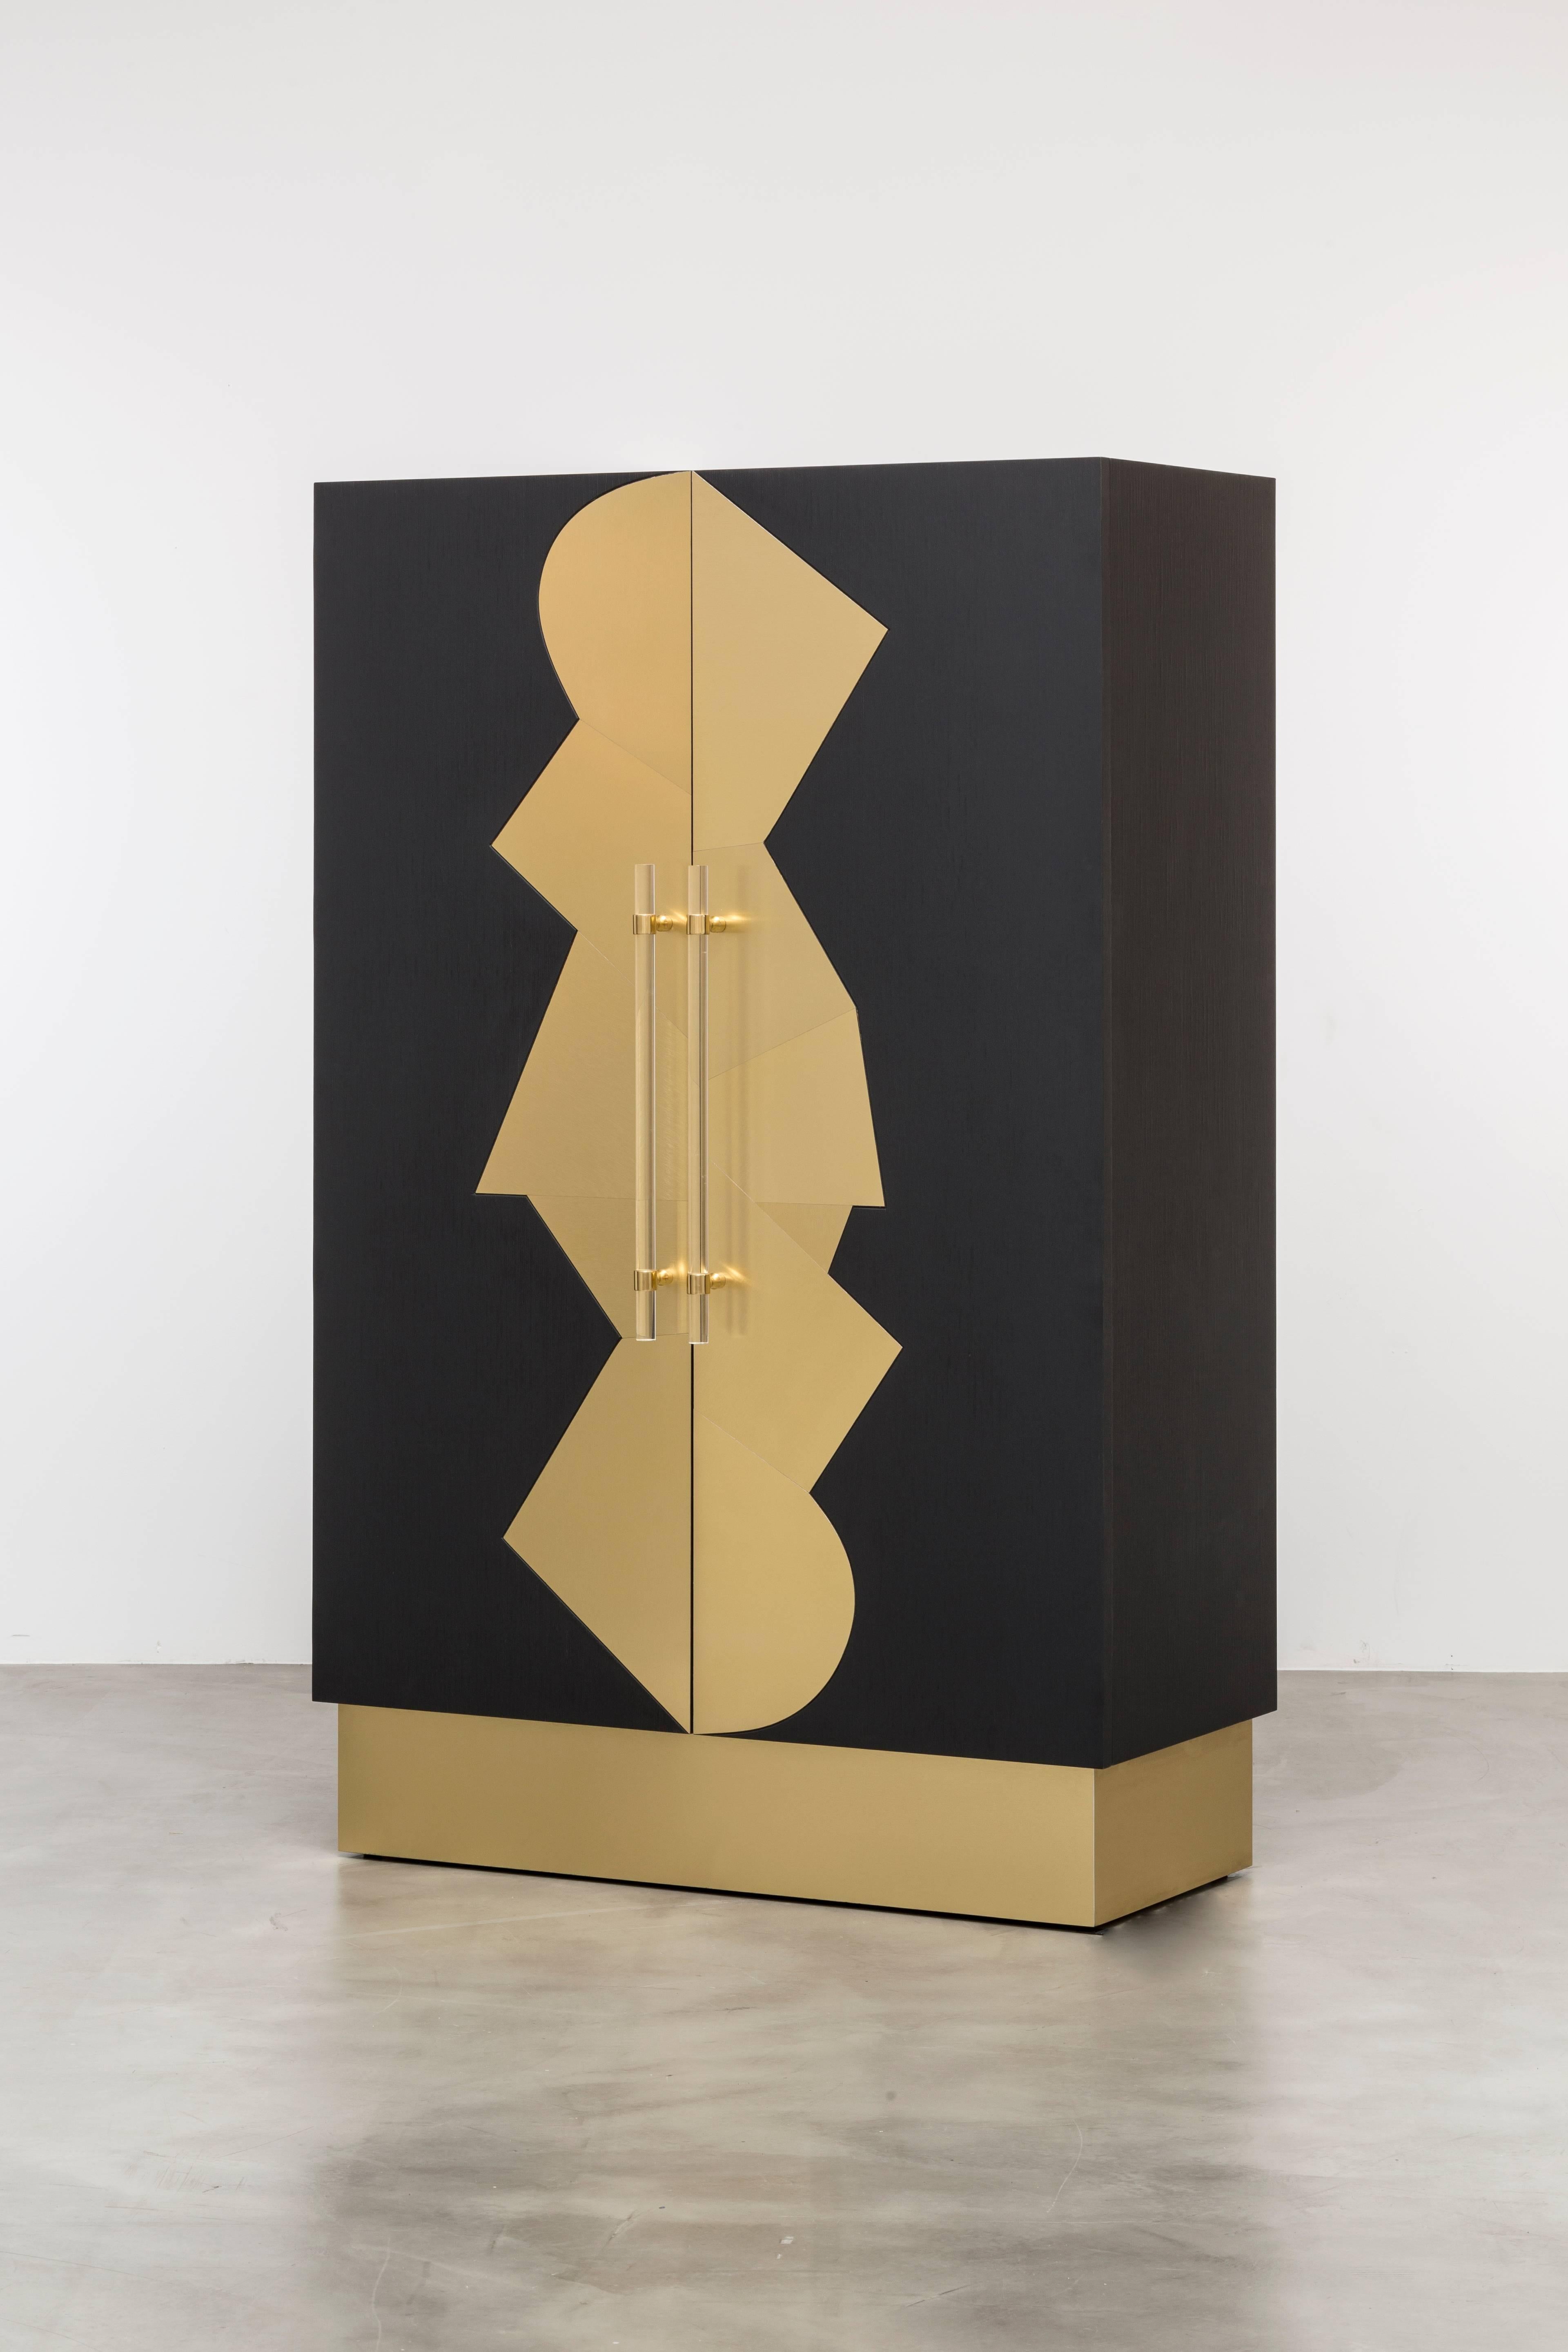 COCO CABINET - Modern Ebony Oak Cabinet with Brass Inlays and Acrylic Handles

The Coco Cabinet is a luxurious piece of furniture that features an Art Deco-inspired design, with a fractured brushed brass inlay detail on an ebony oak body. The